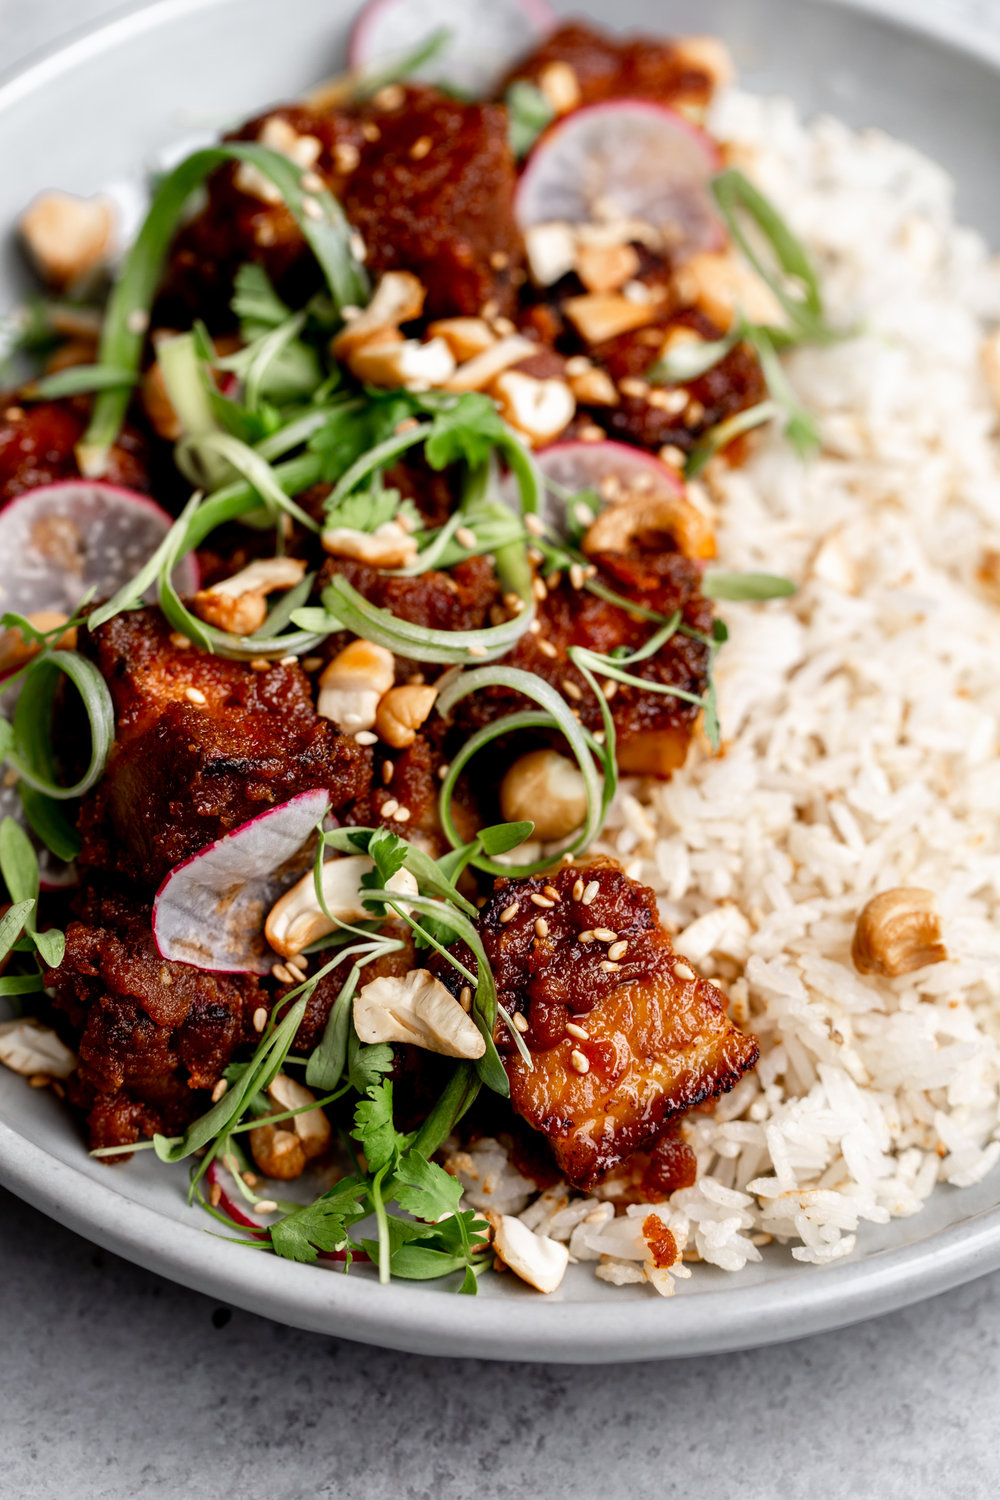 Roasted pork belly tossed in a sauce made from gochujang, a Korean fermented red pepper paste and cashew butter a over crispy rice